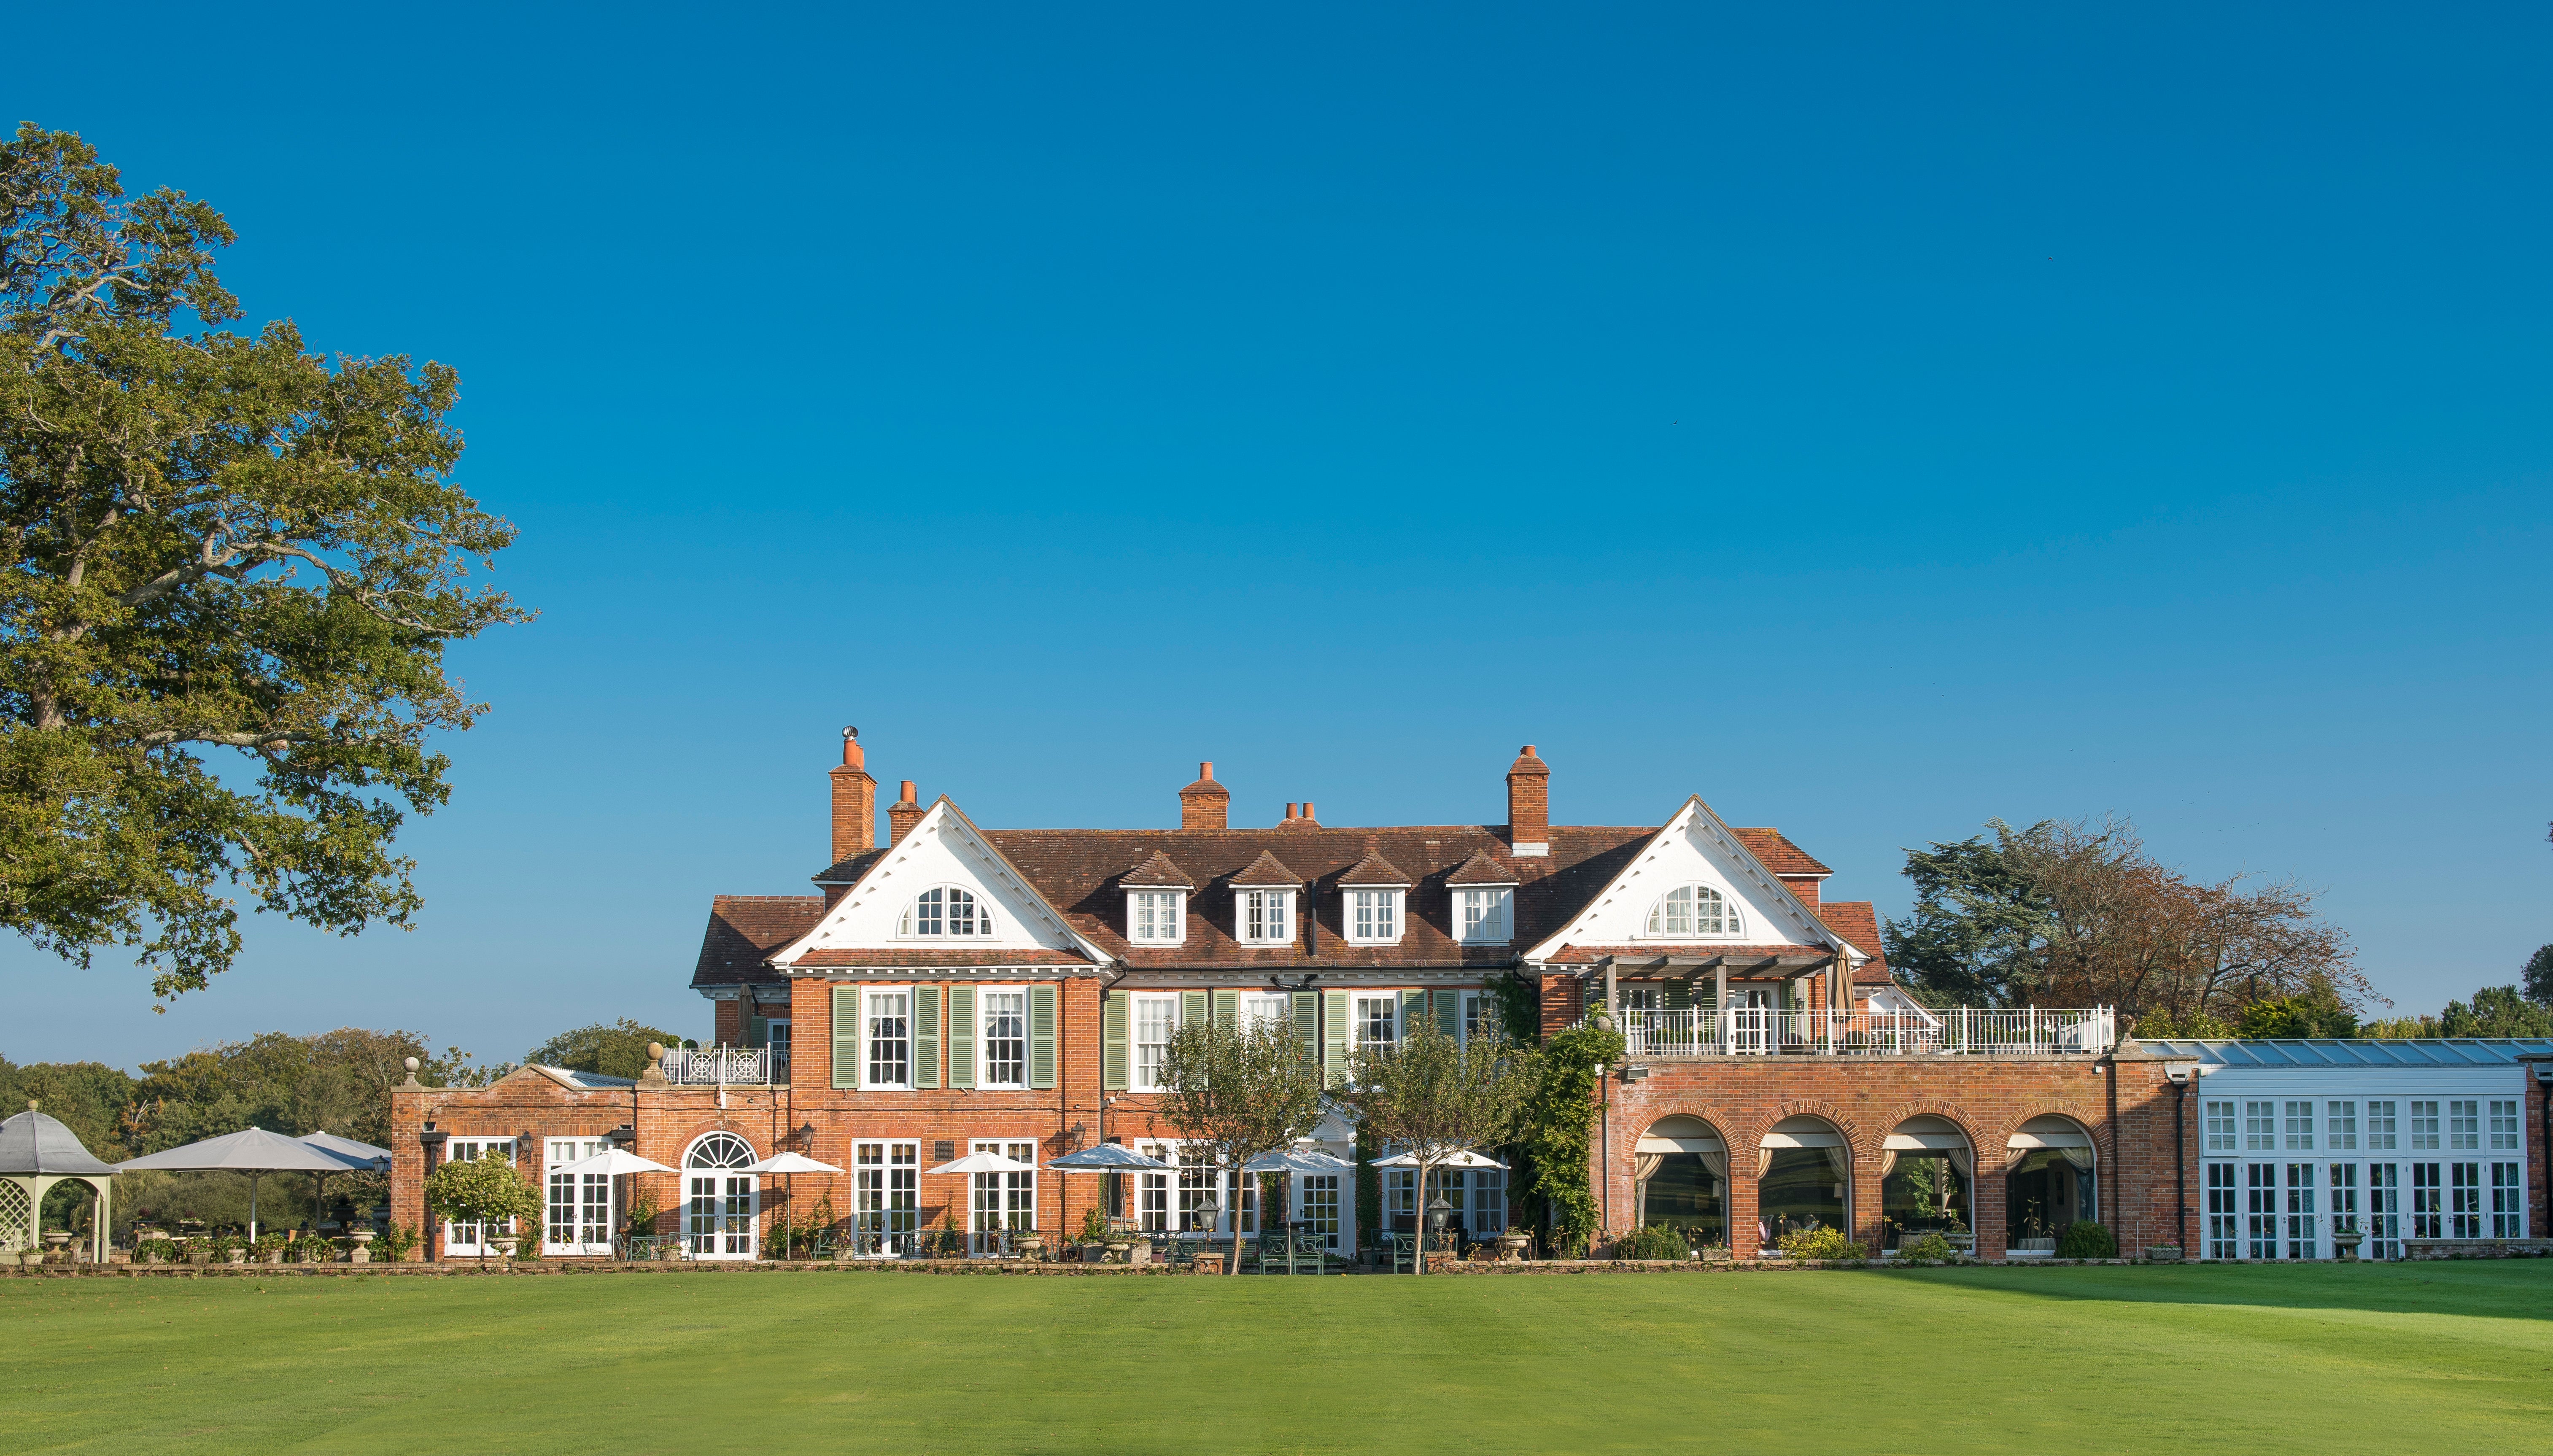 The New Forest is home to plenty of lovely hotels, both peacefully remote or slap-bang in the centre of things